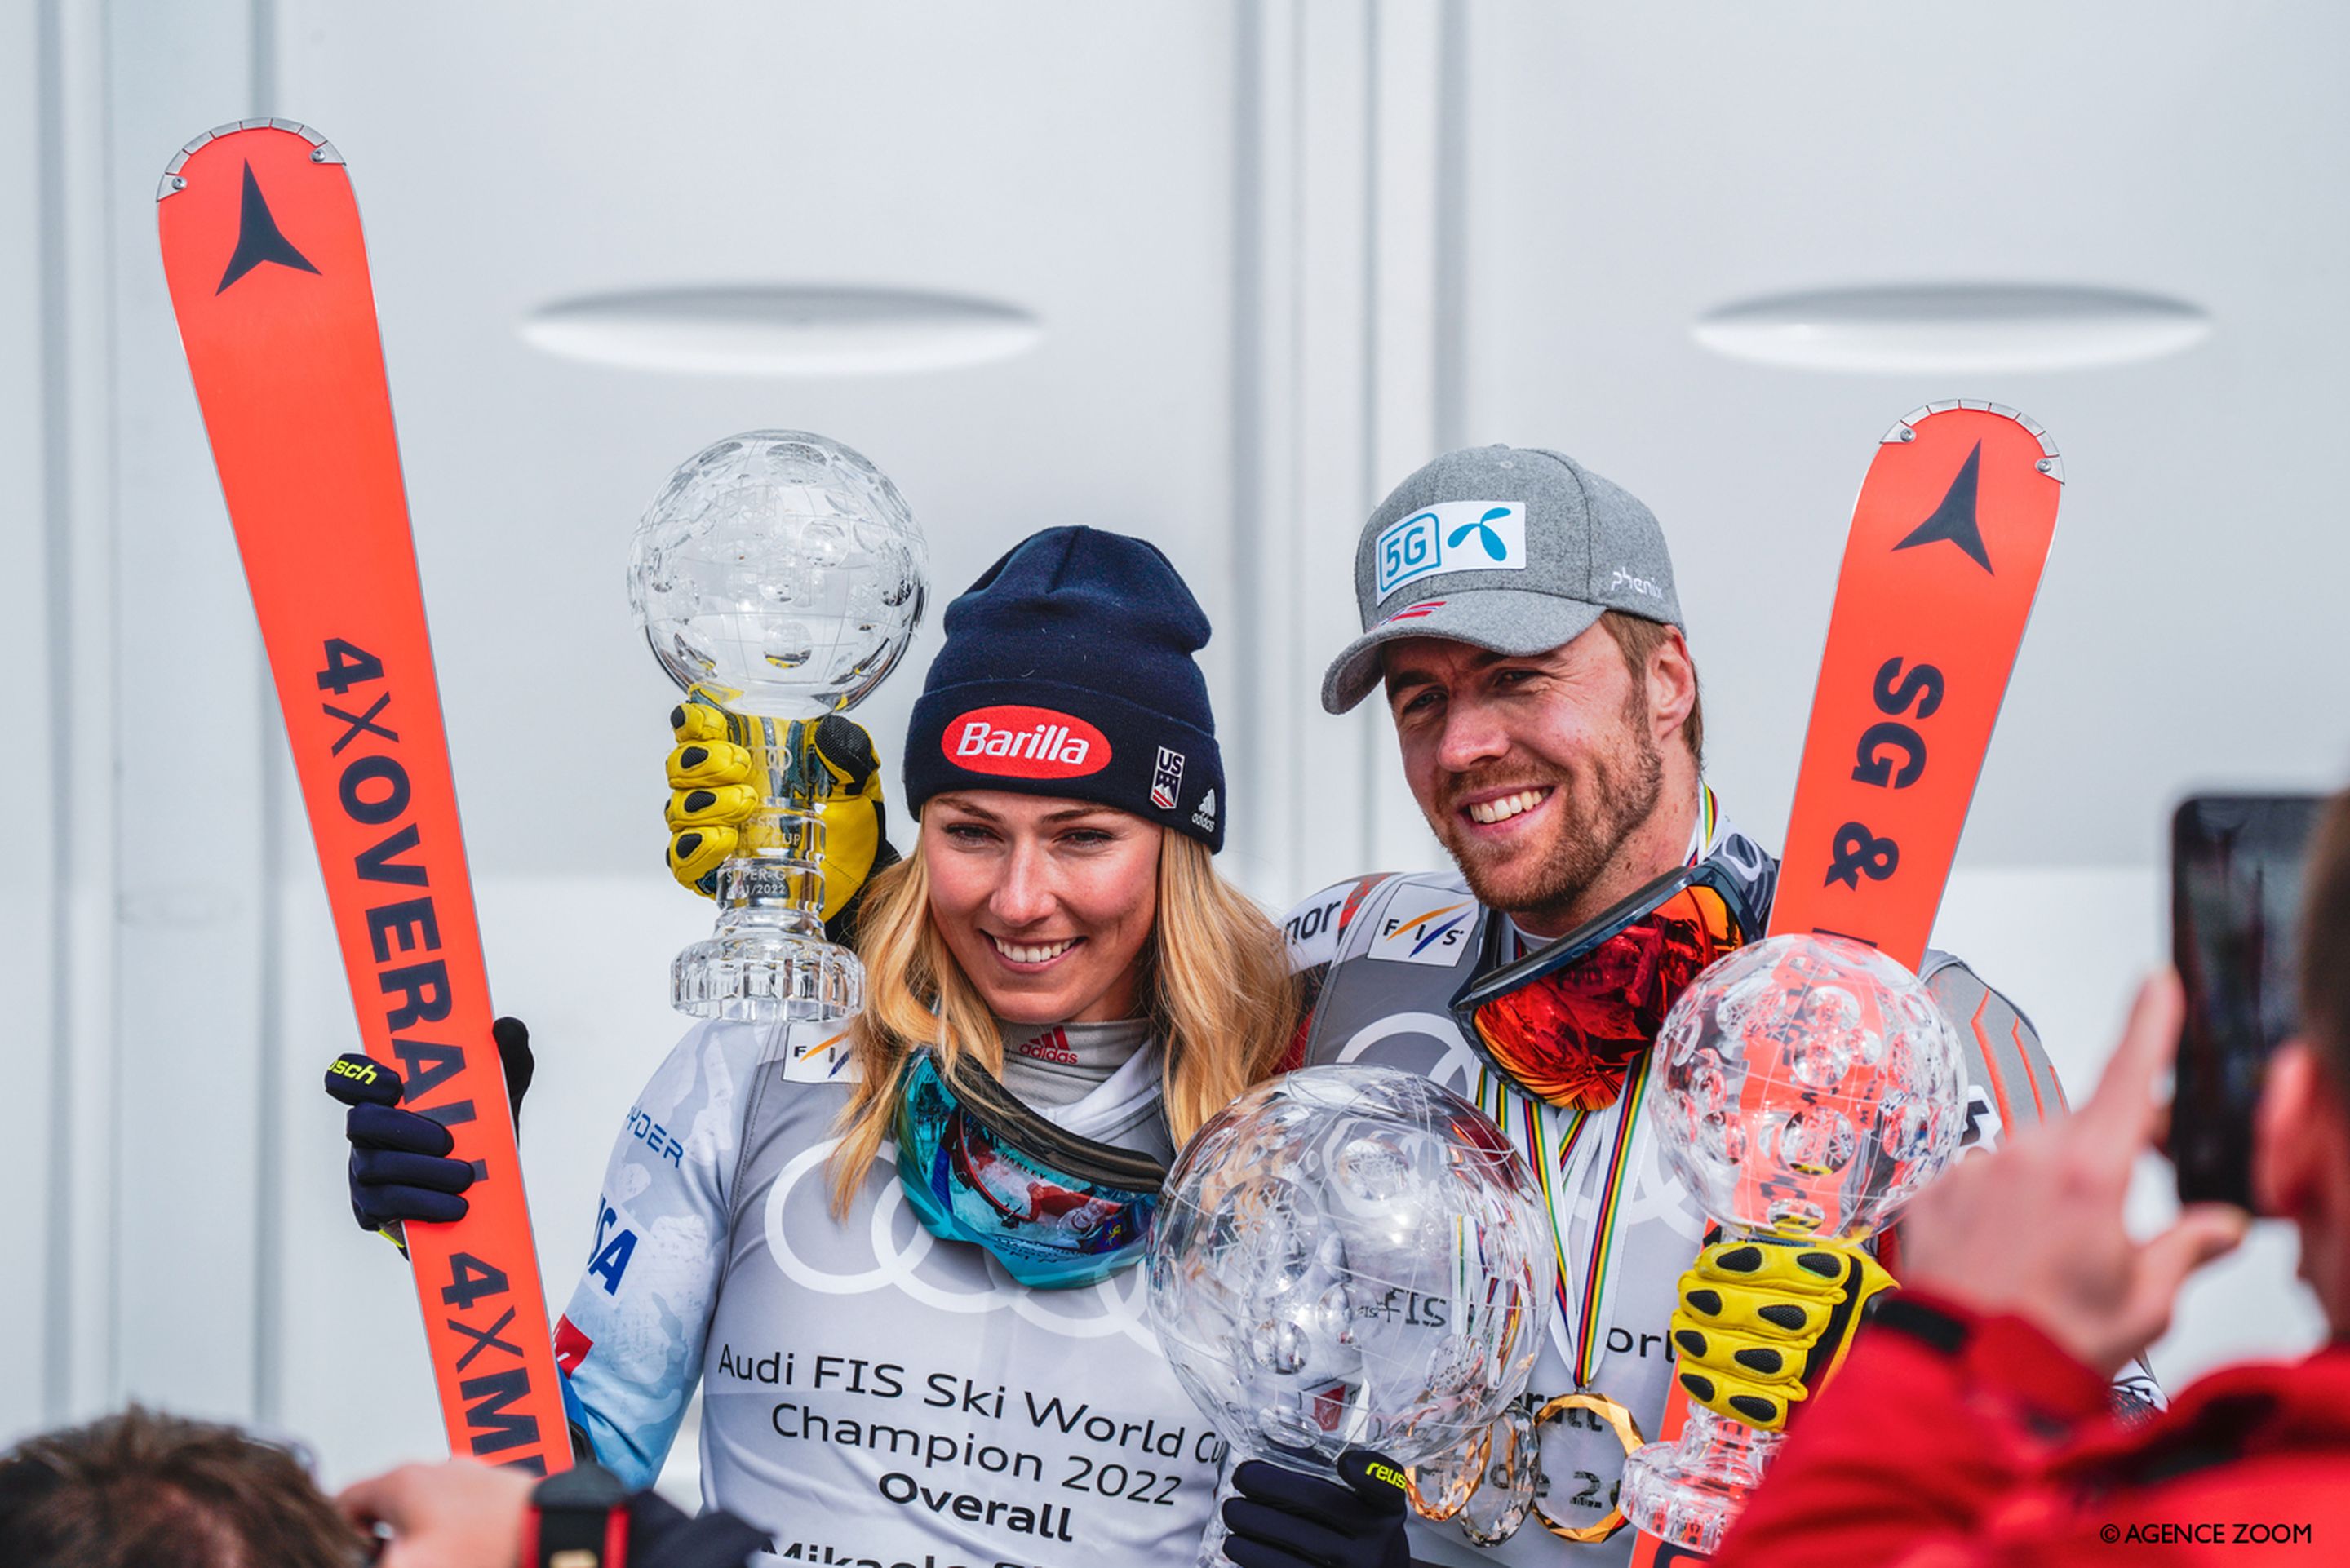 Shiffrin and Kilde at the World Cup finals in France last season (Agence Zoom)